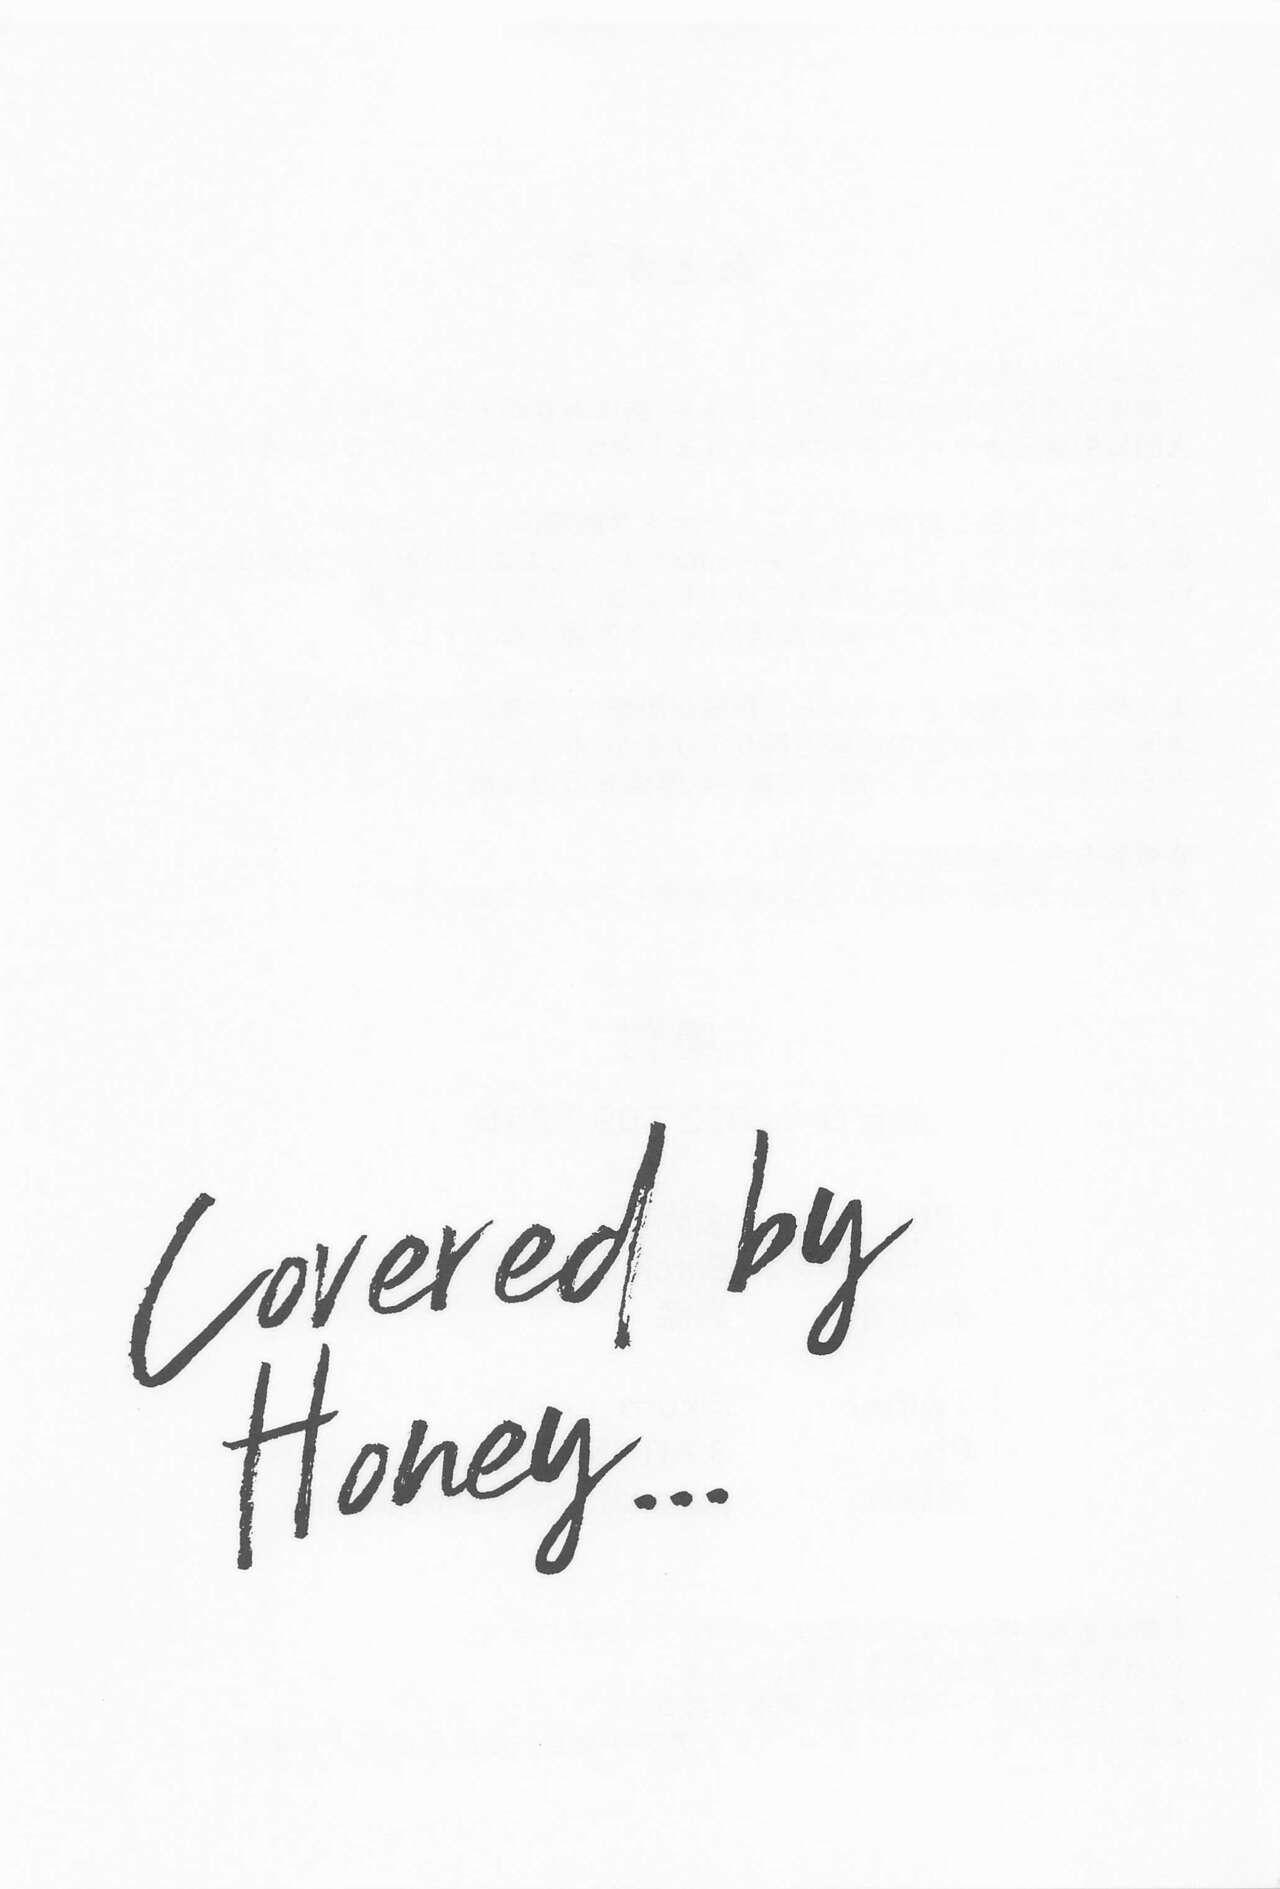 Covered by Honey... 27